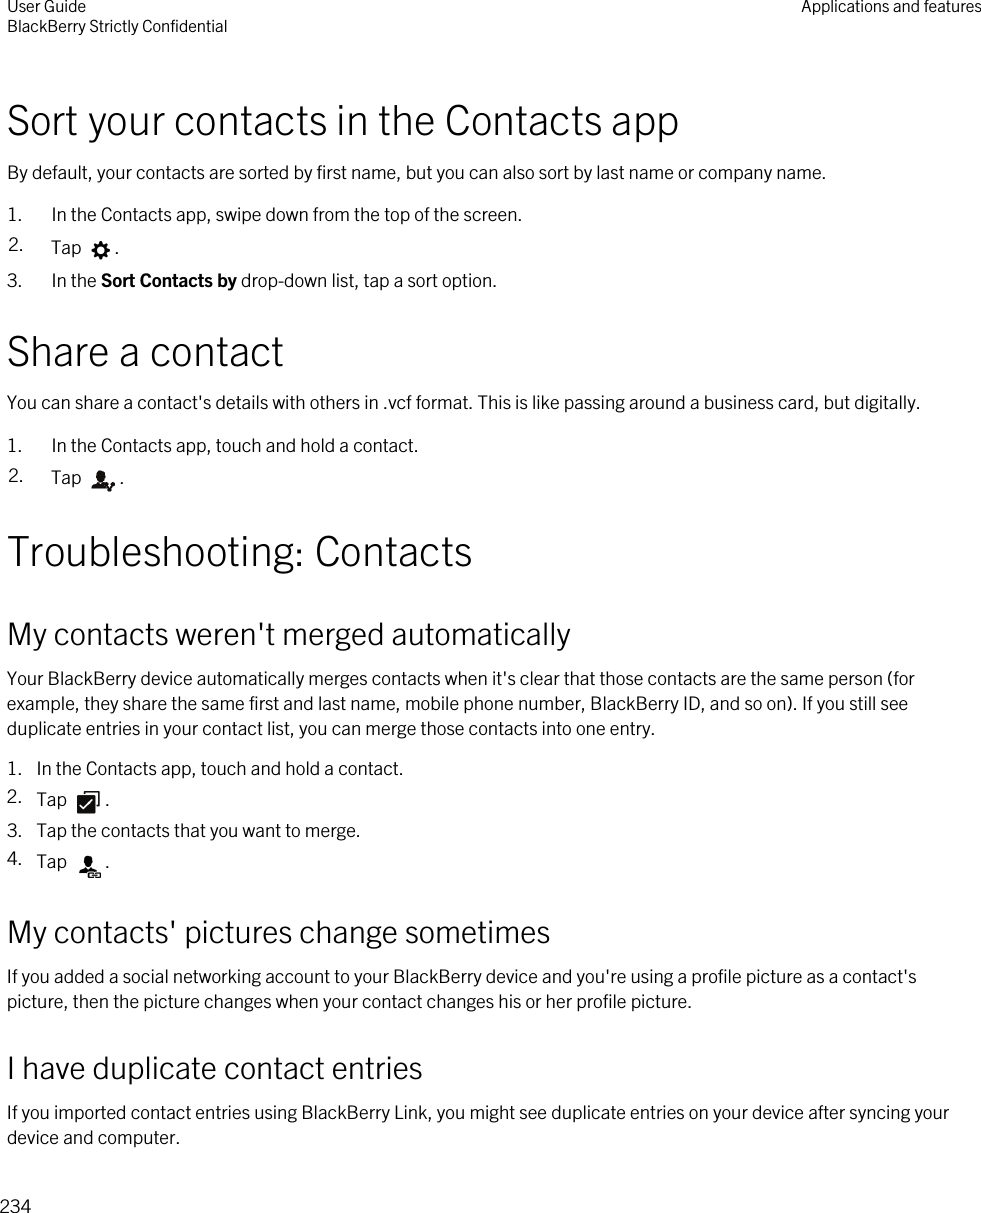 Sort your contacts in the Contacts appBy default, your contacts are sorted by first name, but you can also sort by last name or company name.1. In the Contacts app, swipe down from the top of the screen.2. Tap  .3. In the Sort Contacts by drop-down list, tap a sort option.Share a contactYou can share a contact&apos;s details with others in .vcf format. This is like passing around a business card, but digitally.1. In the Contacts app, touch and hold a contact.2. Tap  .Troubleshooting: ContactsMy contacts weren&apos;t merged automaticallyYour BlackBerry device automatically merges contacts when it&apos;s clear that those contacts are the same person (for example, they share the same first and last name, mobile phone number, BlackBerry ID, and so on). If you still see duplicate entries in your contact list, you can merge those contacts into one entry.1. In the Contacts app, touch and hold a contact.2. Tap  .3. Tap the contacts that you want to merge.4. Tap  .My contacts&apos; pictures change sometimesIf you added a social networking account to your BlackBerry device and you&apos;re using a profile picture as a contact&apos;s picture, then the picture changes when your contact changes his or her profile picture.I have duplicate contact entriesIf you imported contact entries using BlackBerry Link, you might see duplicate entries on your device after syncing your device and computer.User GuideBlackBerry Strictly Confidential Applications and features234